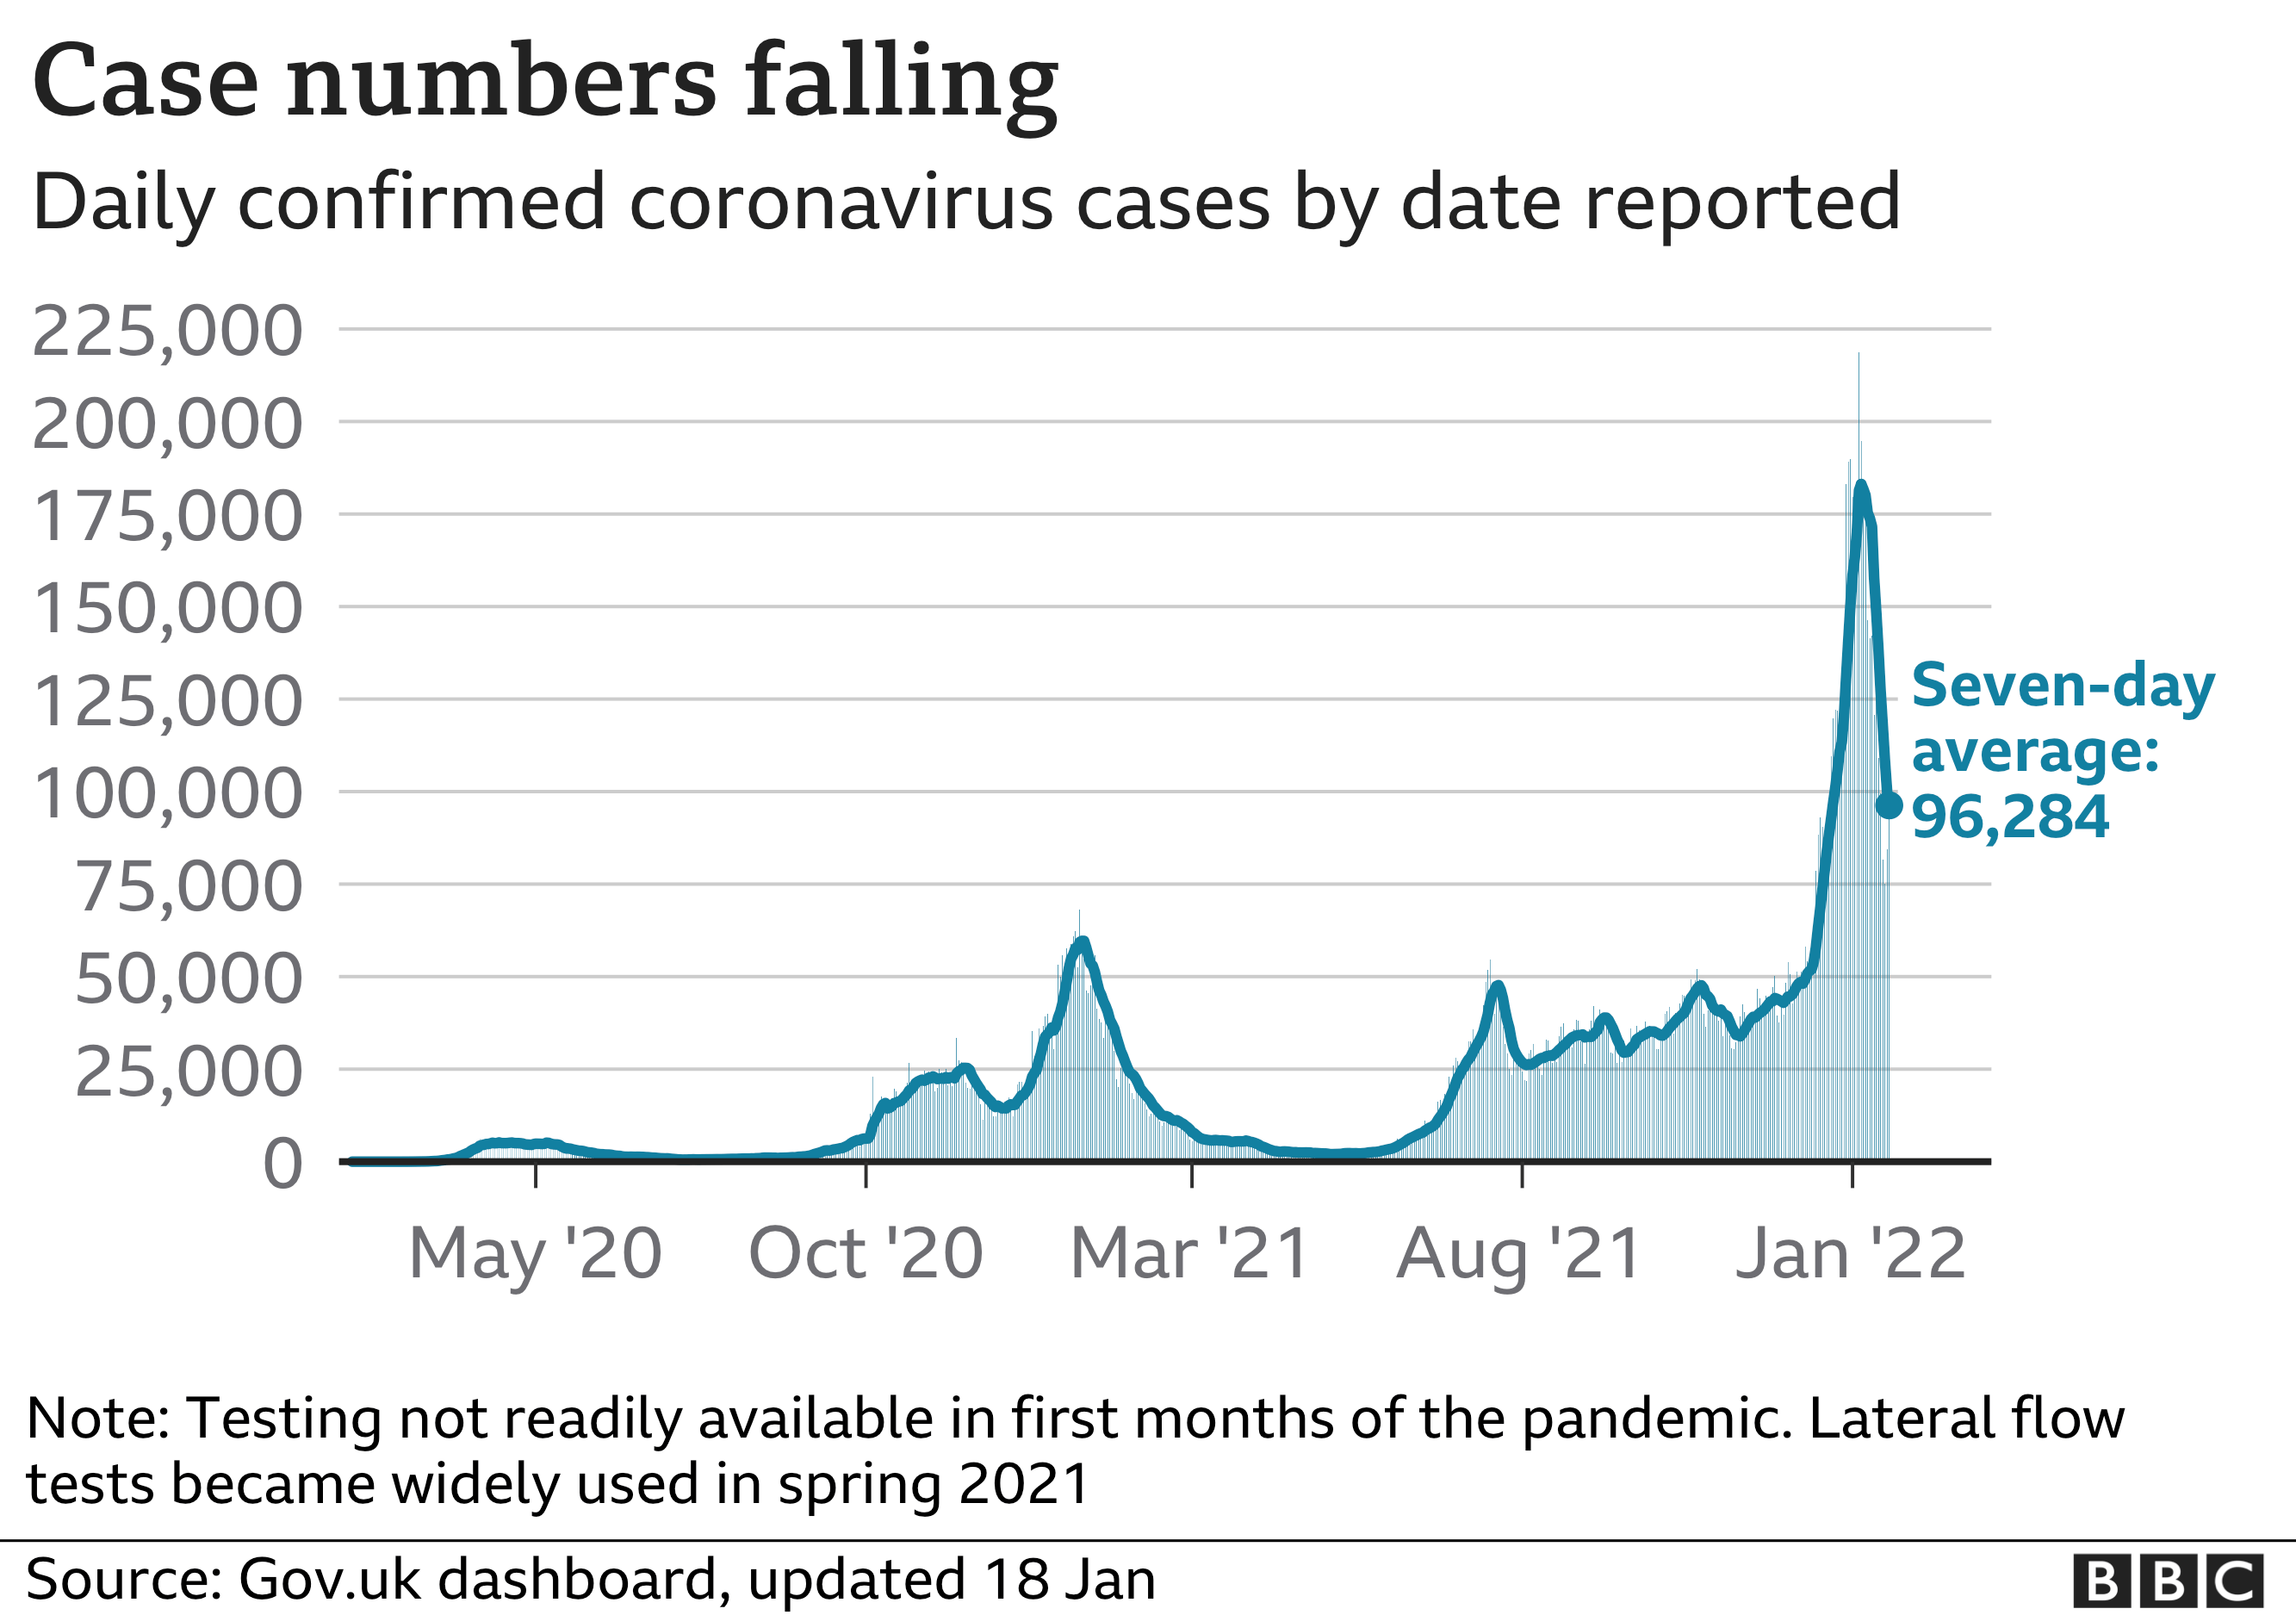 Chart showing that the number of daily cases in the UK remains high but is falling